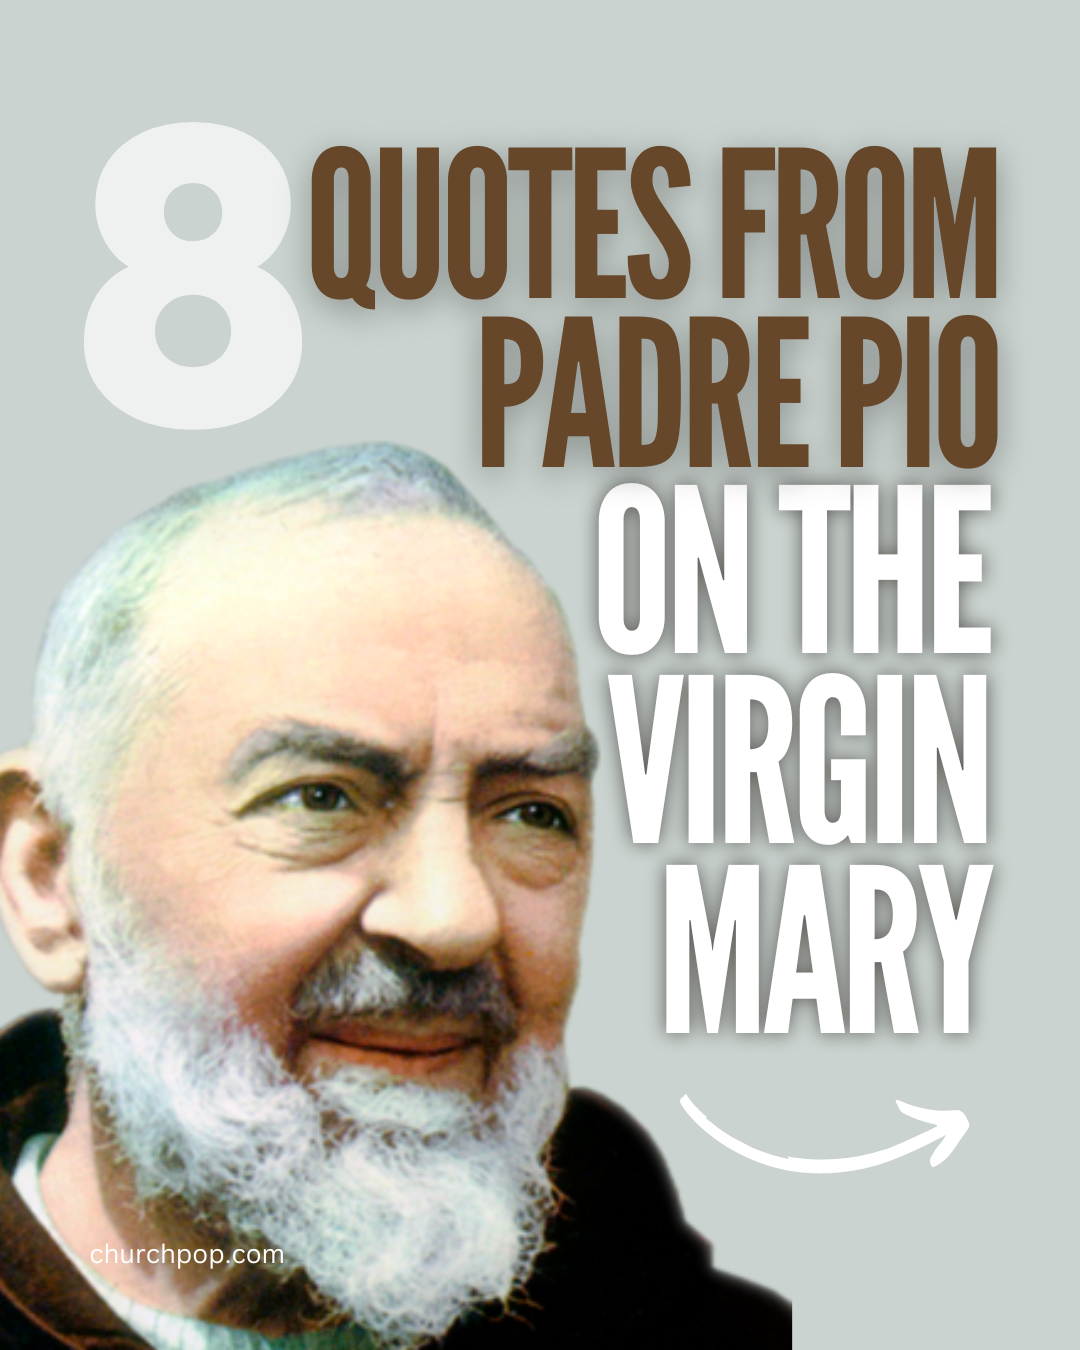 Padre Pio devotion to Mother Mary